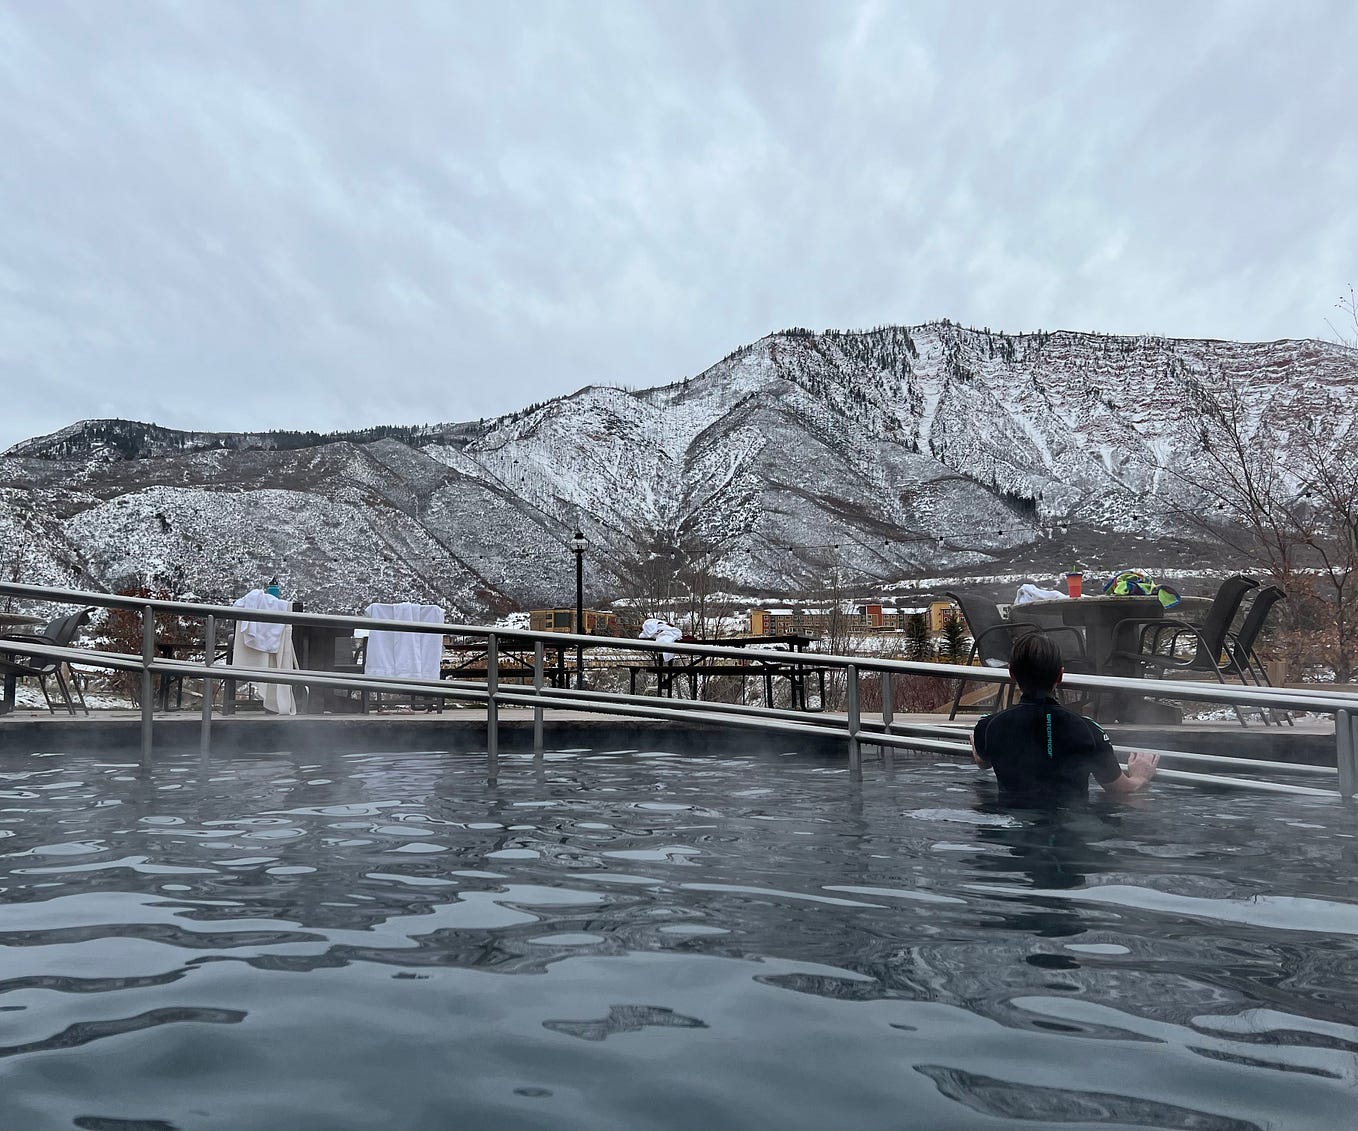 Author is staring at a snow-covered mountain from inside of a pool full of water from the hot springs.